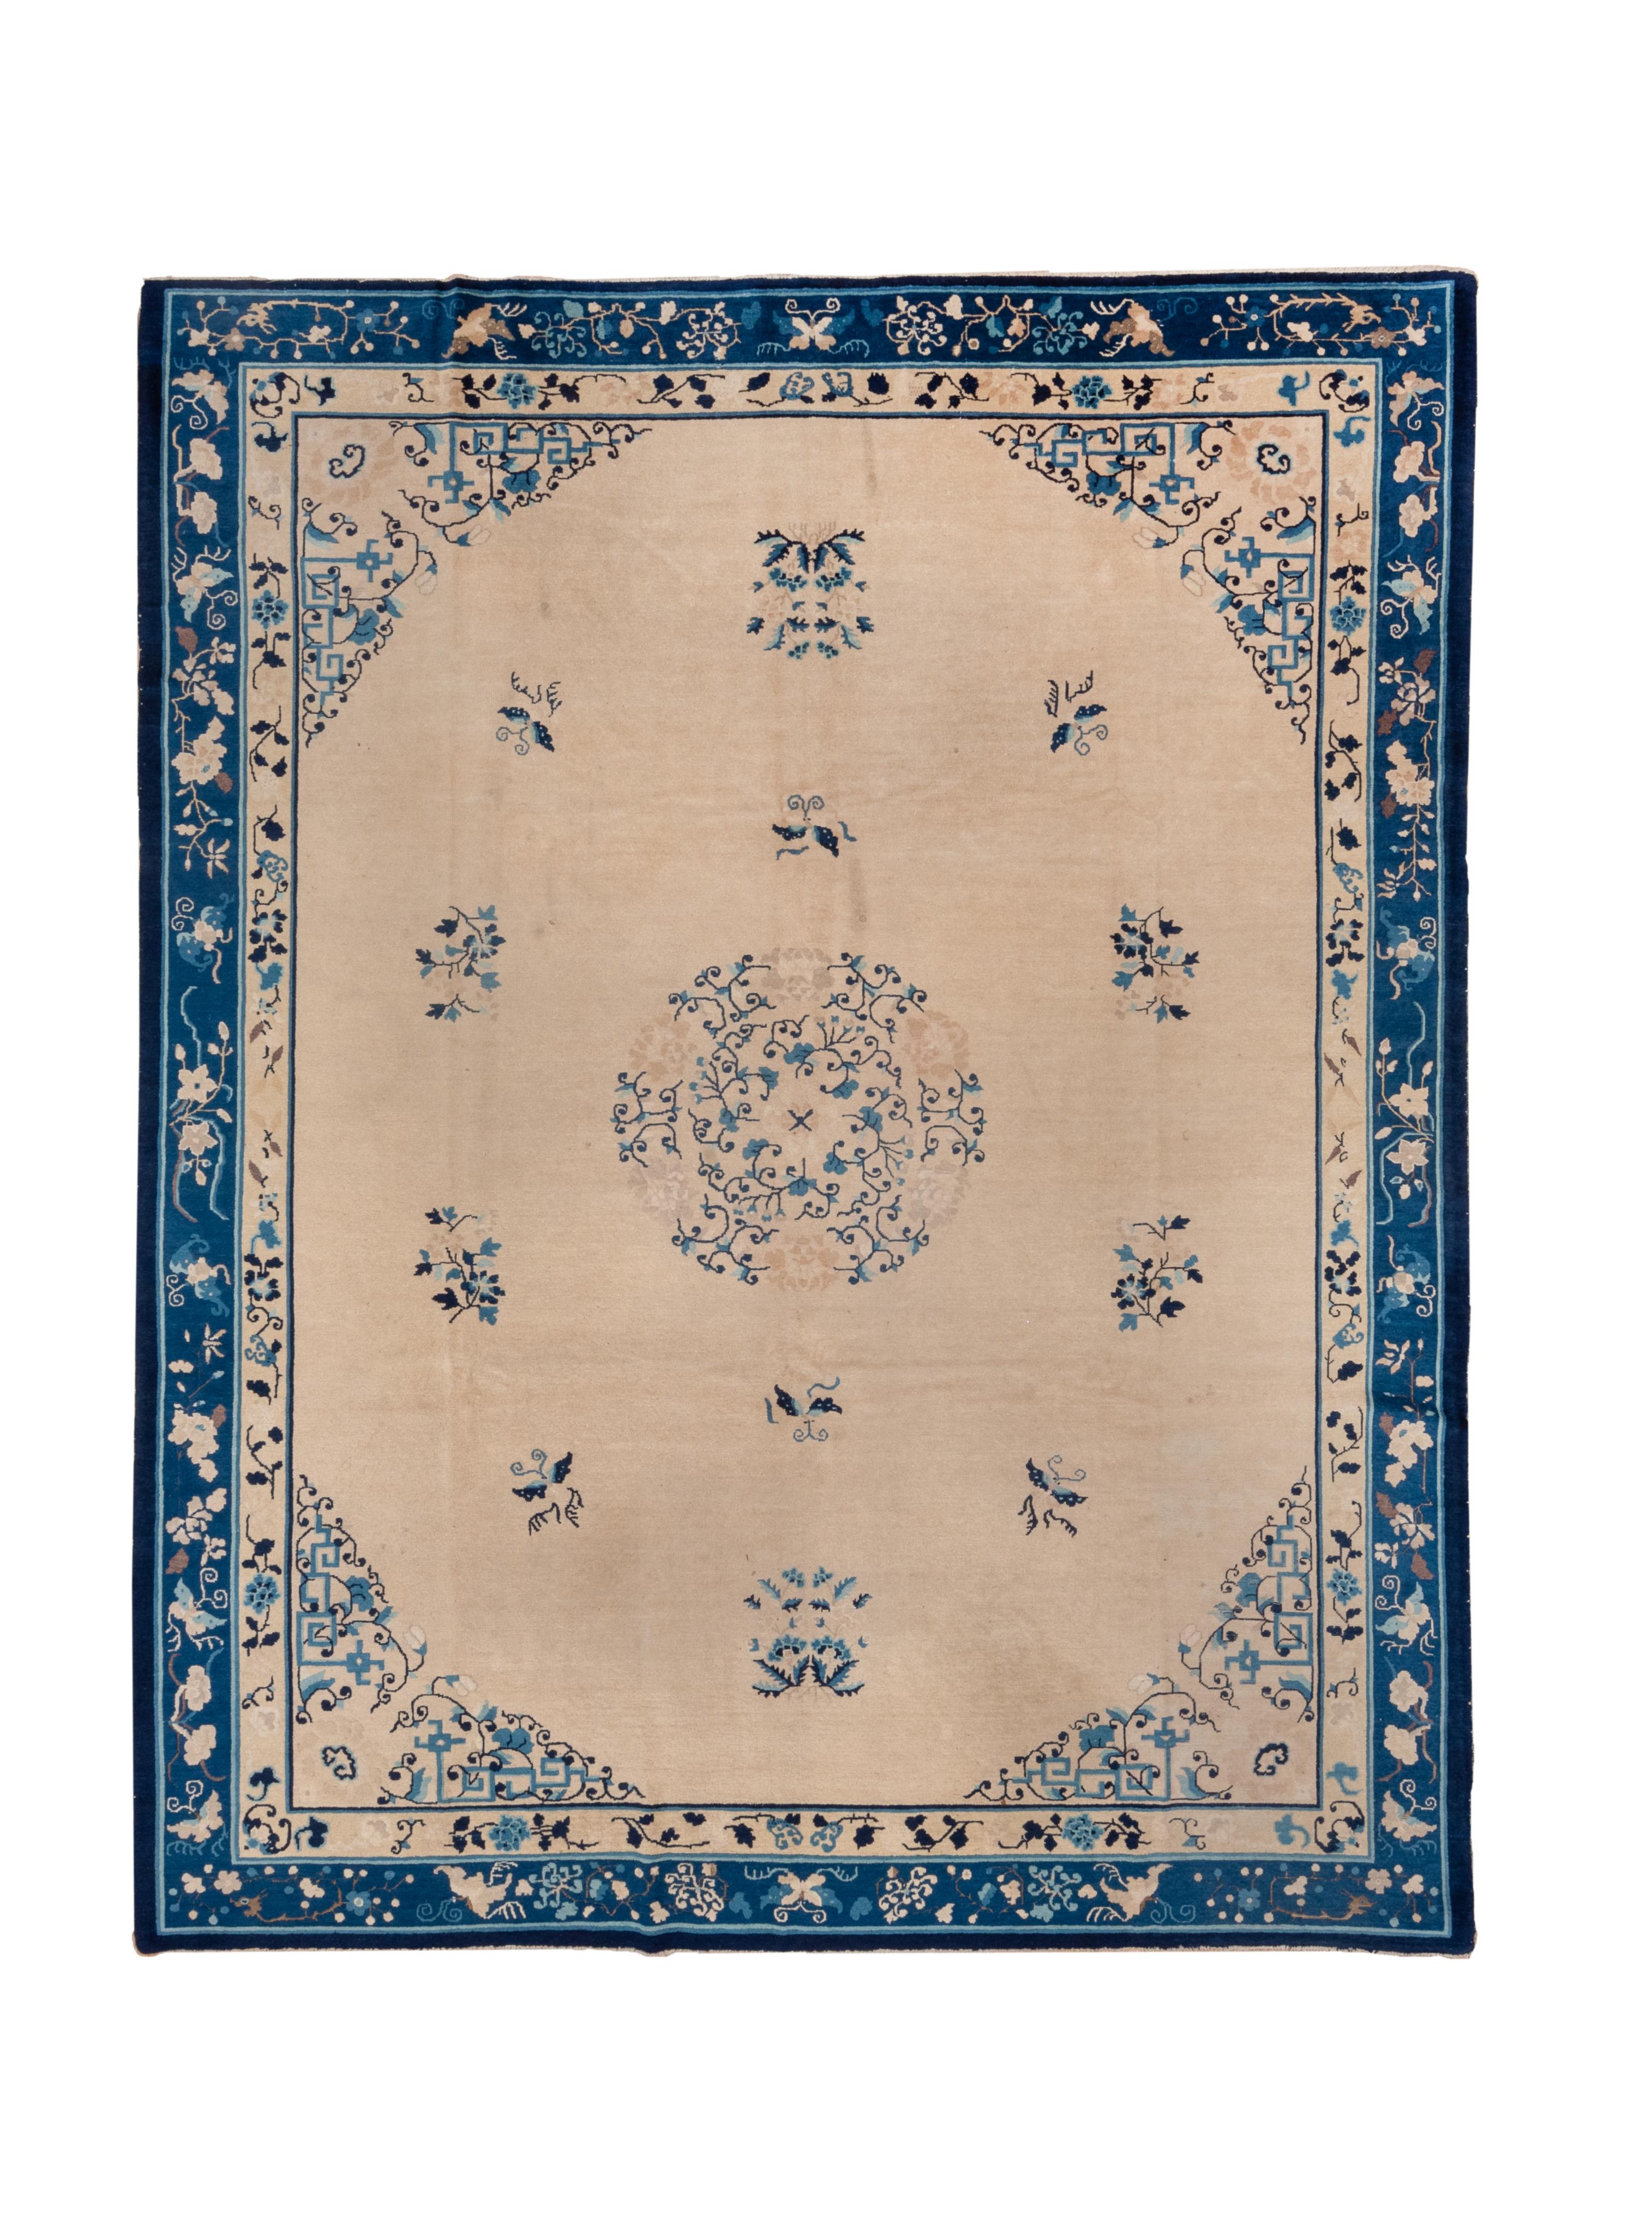 This classic blue-and-white carpet shows a rounded cream field with butterflies and floral sprays discreetly surrounding an openwork wreath and inner circular floral medallion.  Delicate arabesque corners. Narrow dark blue main border with